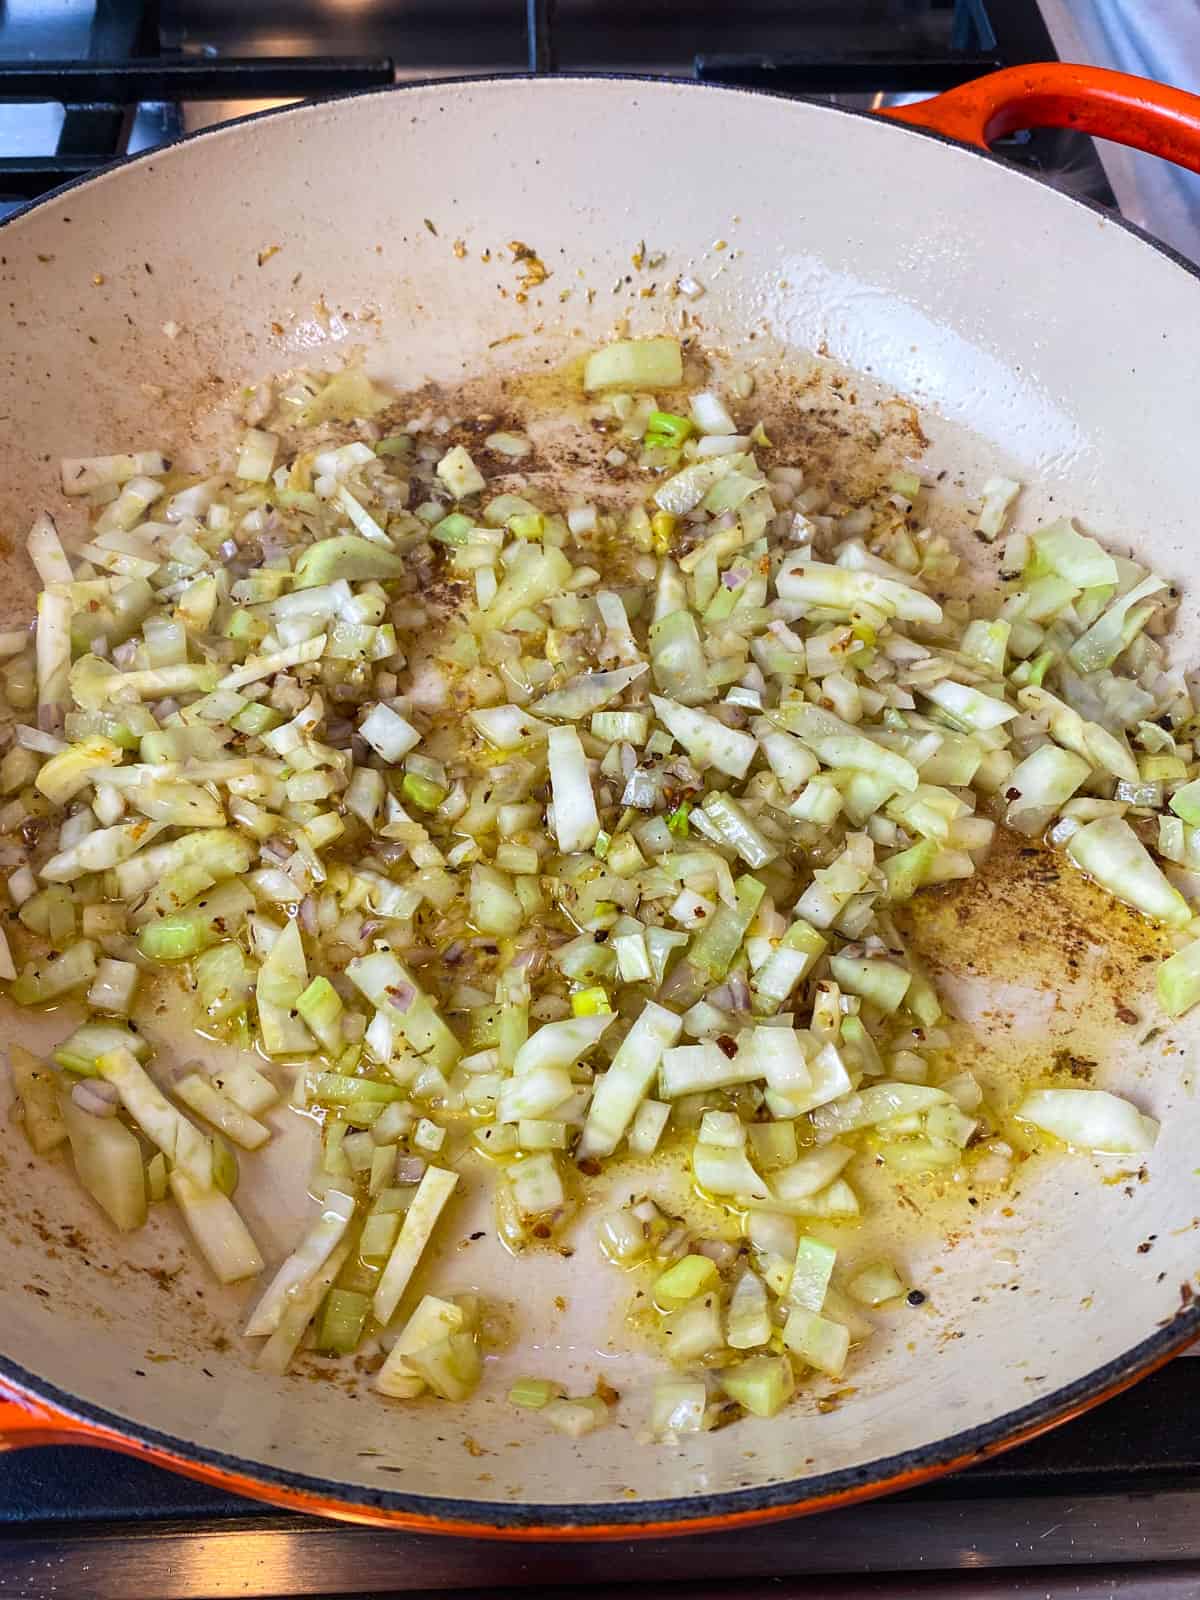 Saute the chopped fennel and shallot in olive oil.